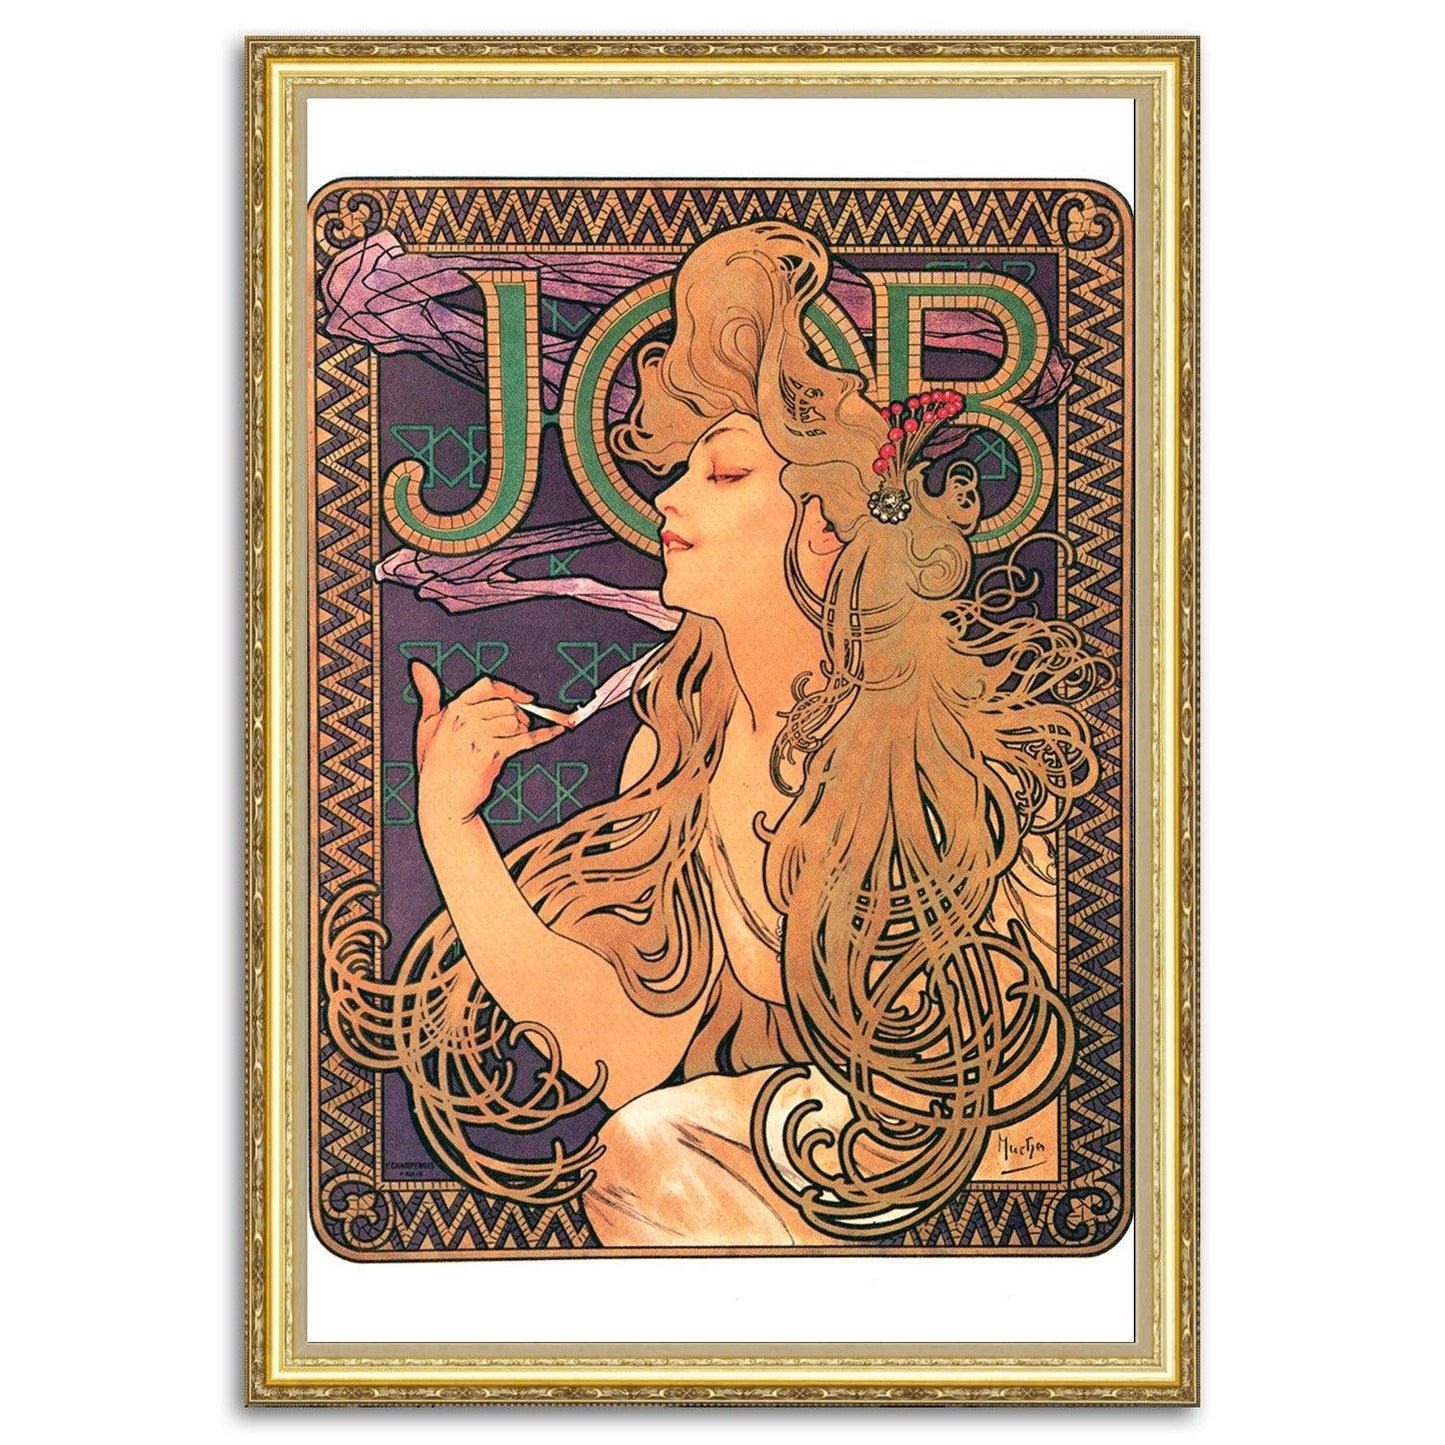 Give your home decor a touch of elegance through our exquisite Job reproduction poster. The artwork is a collage with the advertisements poster design by Alphonse Mucha (Czech graphic designer, 1860-1939). Year of created 1896.